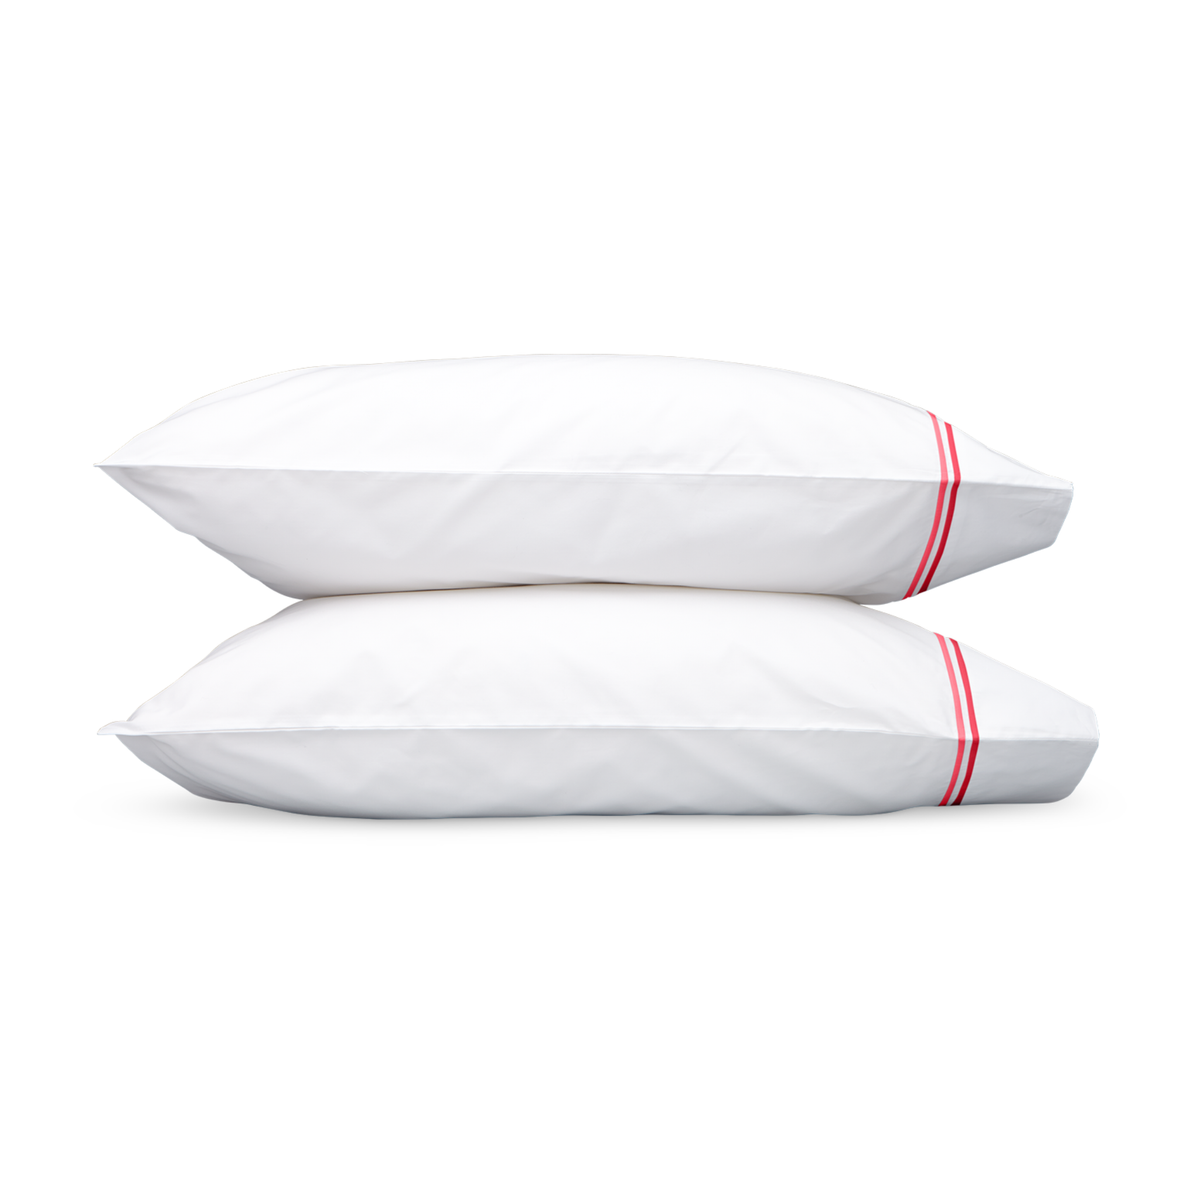 Pair of Pillowcases of Matouk Essex Bedding Collection in Hibiscus Color